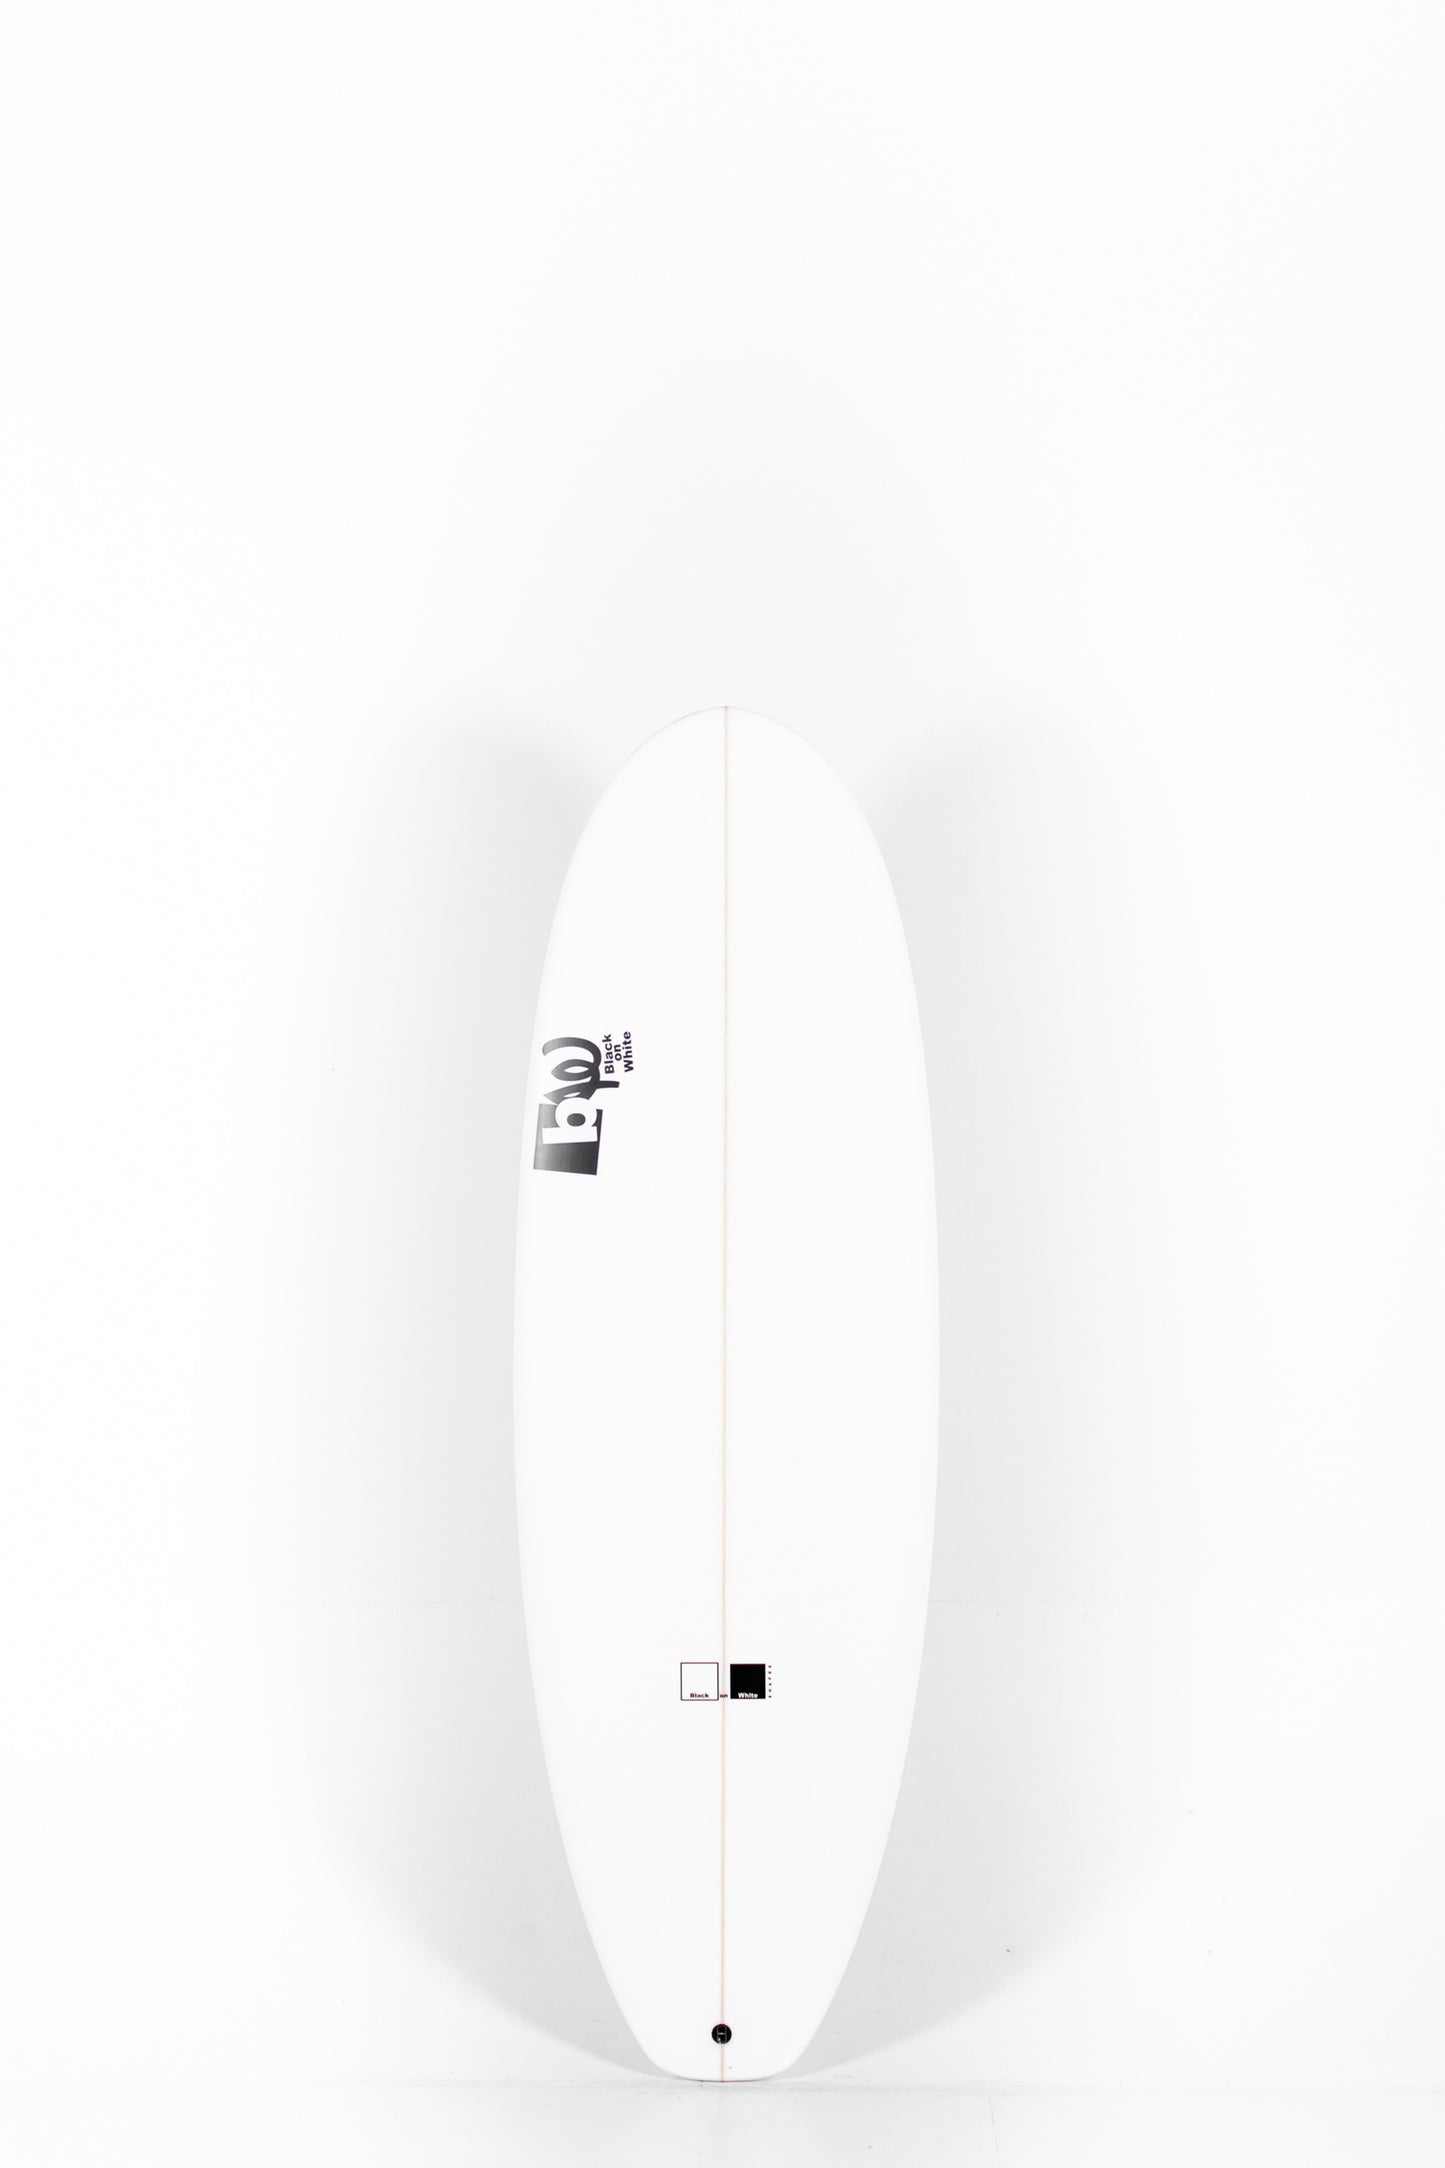 BW SURFBOARDS - BW SURFBOARDS Potato 6'0" x 22 1/2 x 2 1/2 at PUKAS SURF SHOP